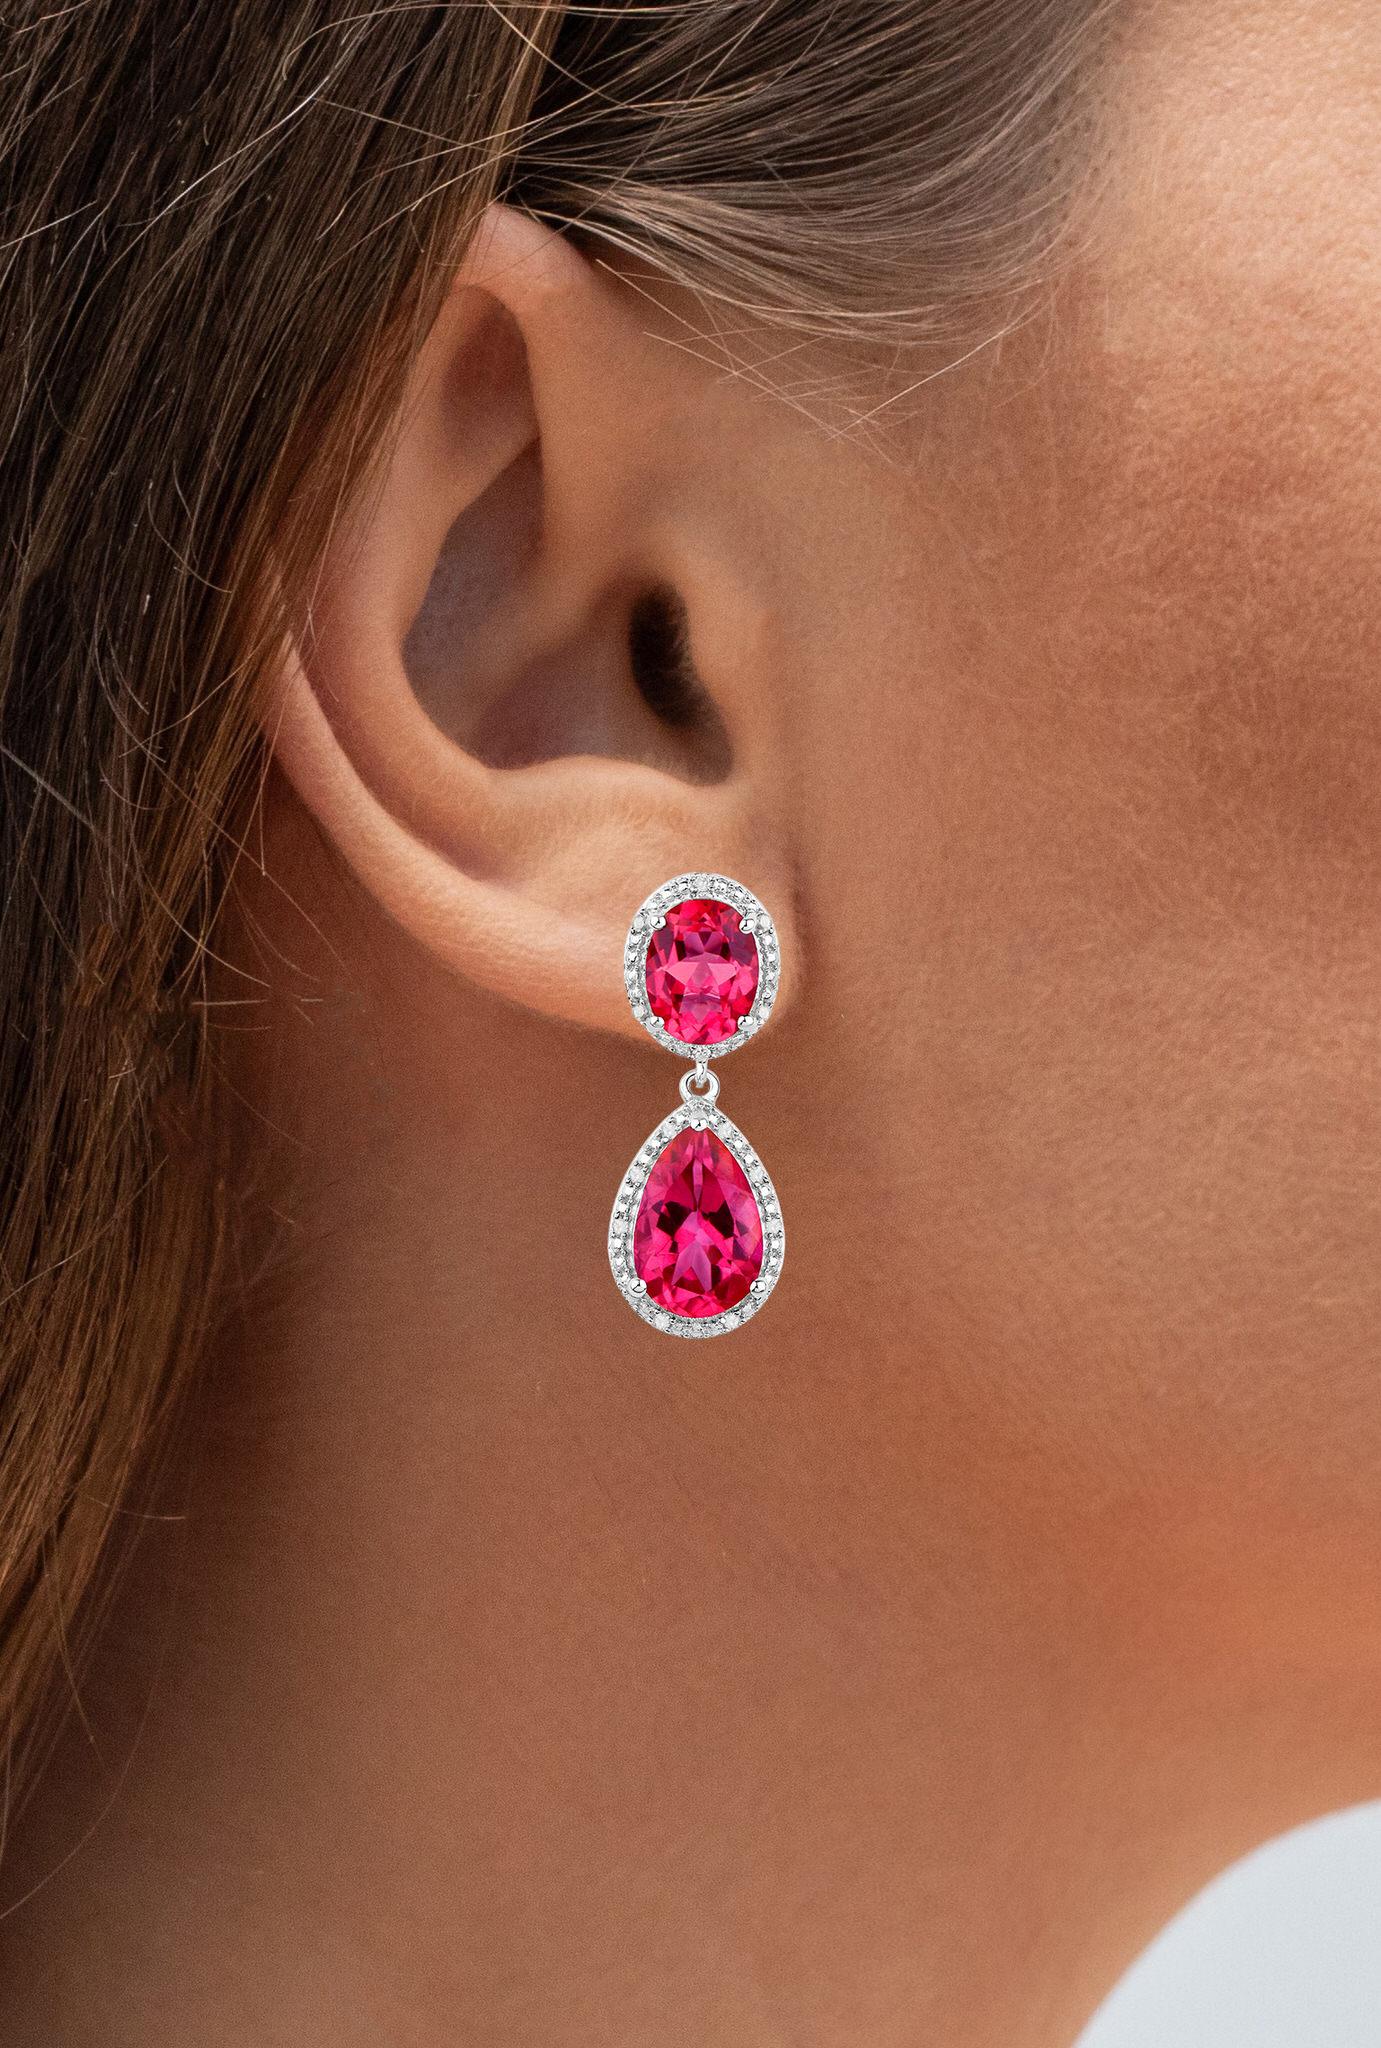 Pear Cut Hot Pink Topaz Earrings Diamond Setting 11.35 Carats Total For Sale